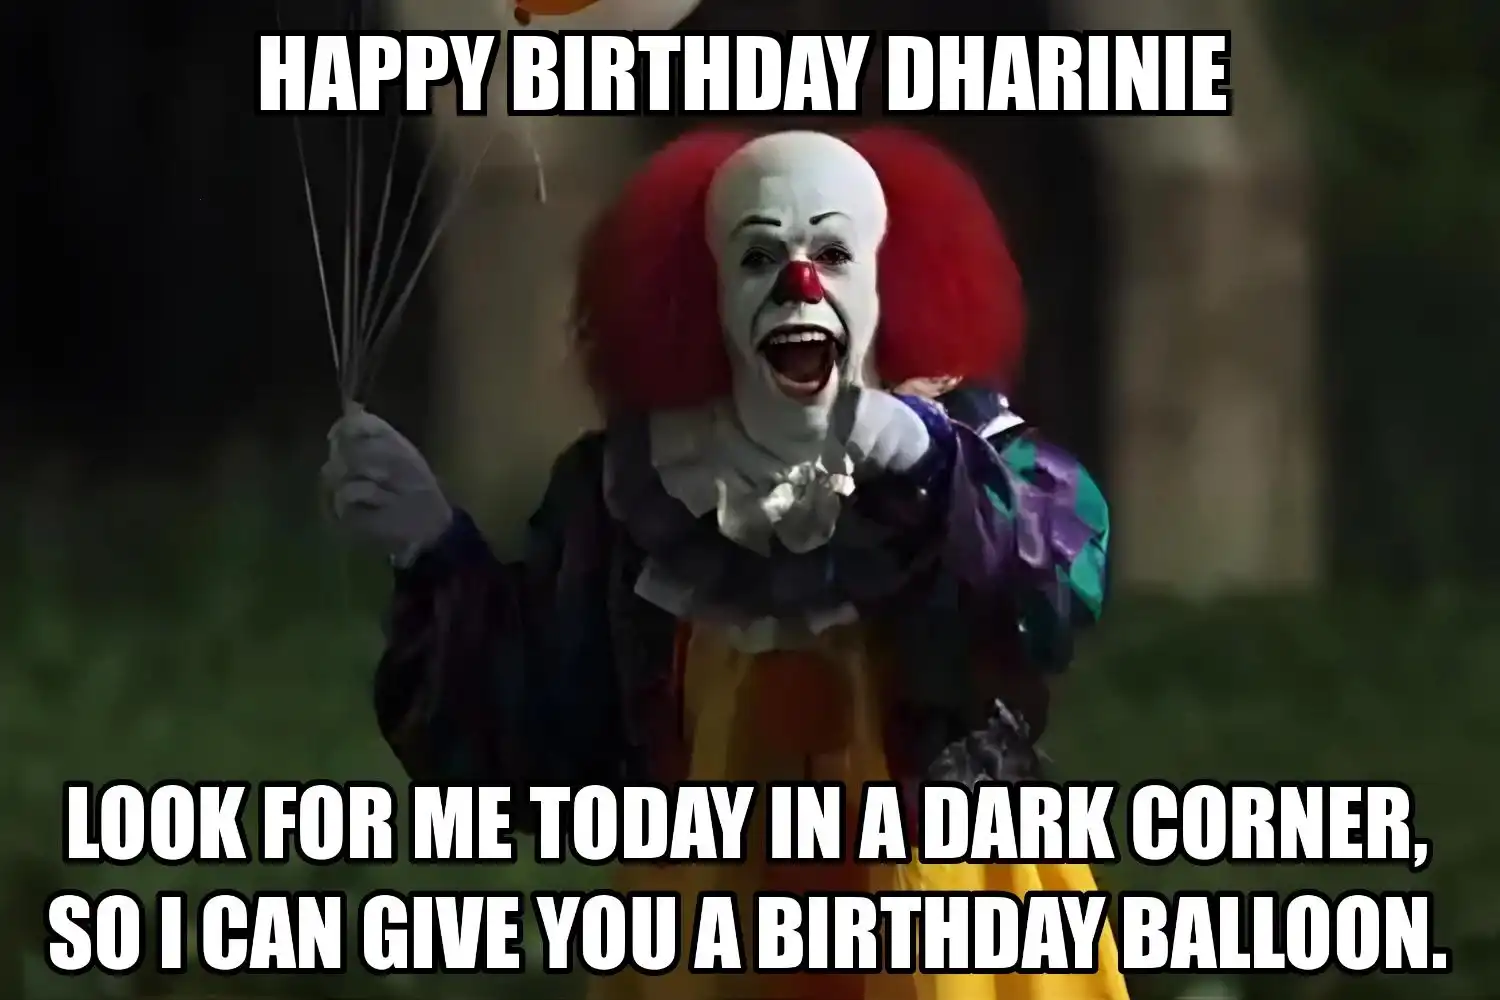 Happy Birthday Dharinie I Can Give You A Balloon Meme